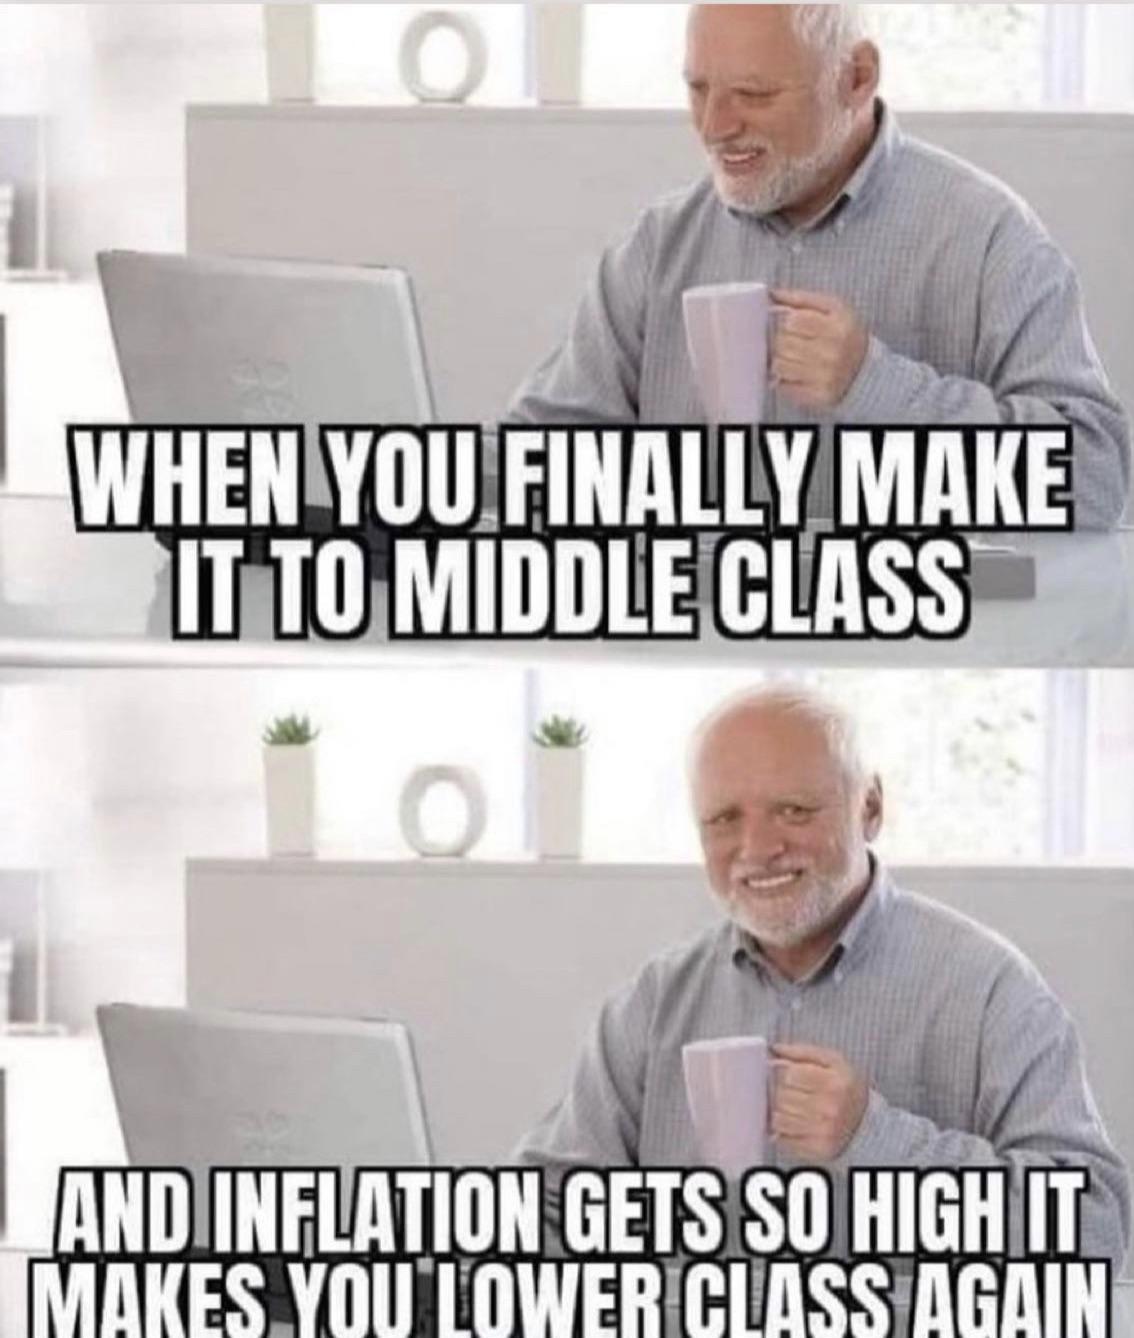 funny memes - middle class inflation meme - O When You Finally Make It To Middle Class Lo And Inflation Gets So High It Makes You Lower Class Again